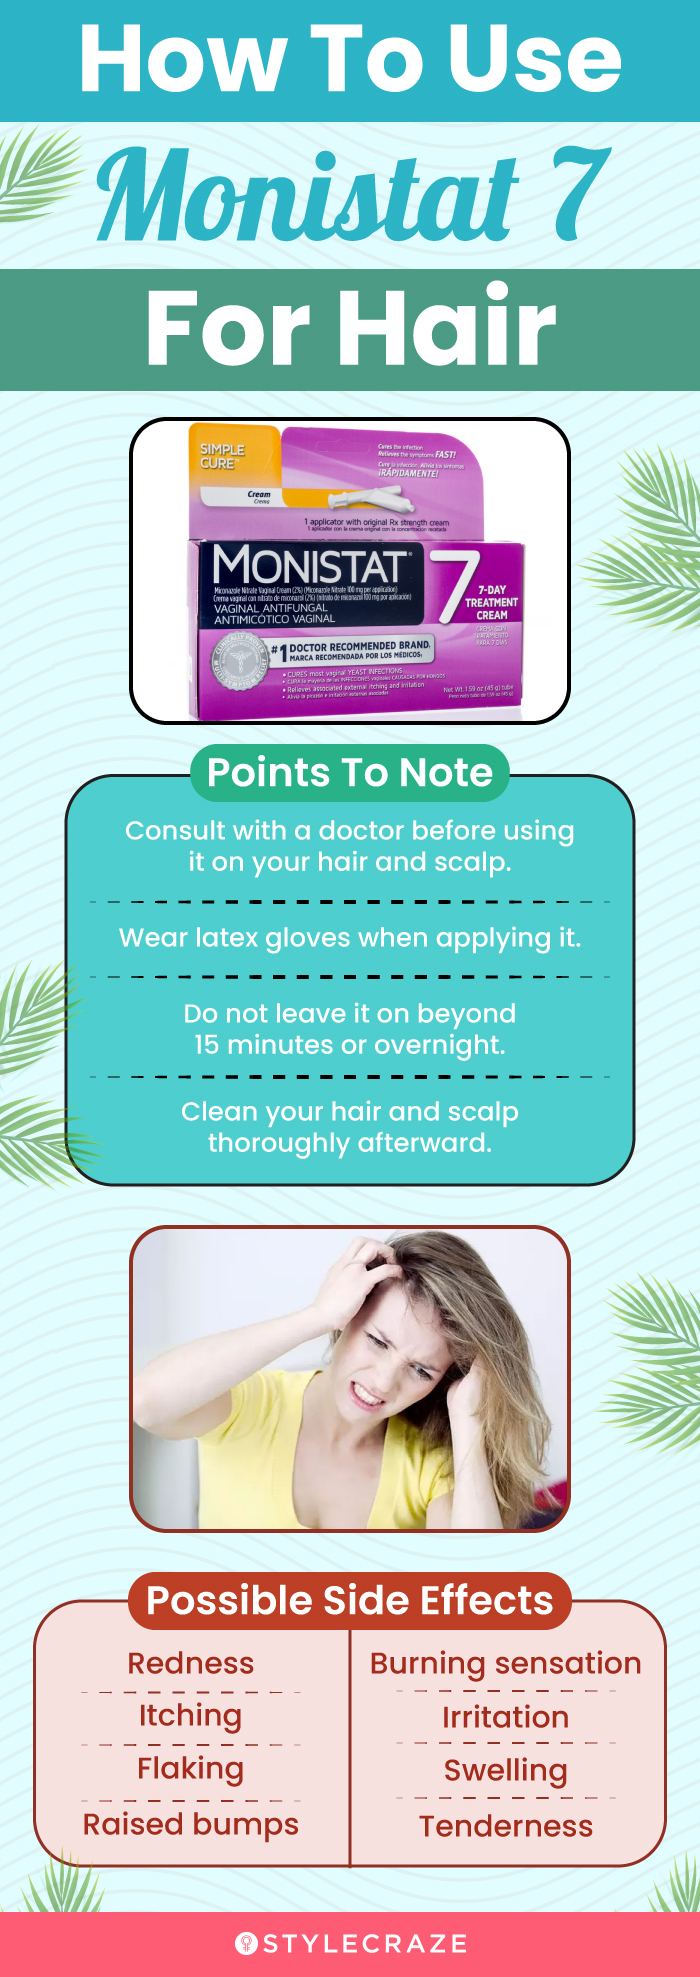 how to use monistat 7 for hair (infographic)